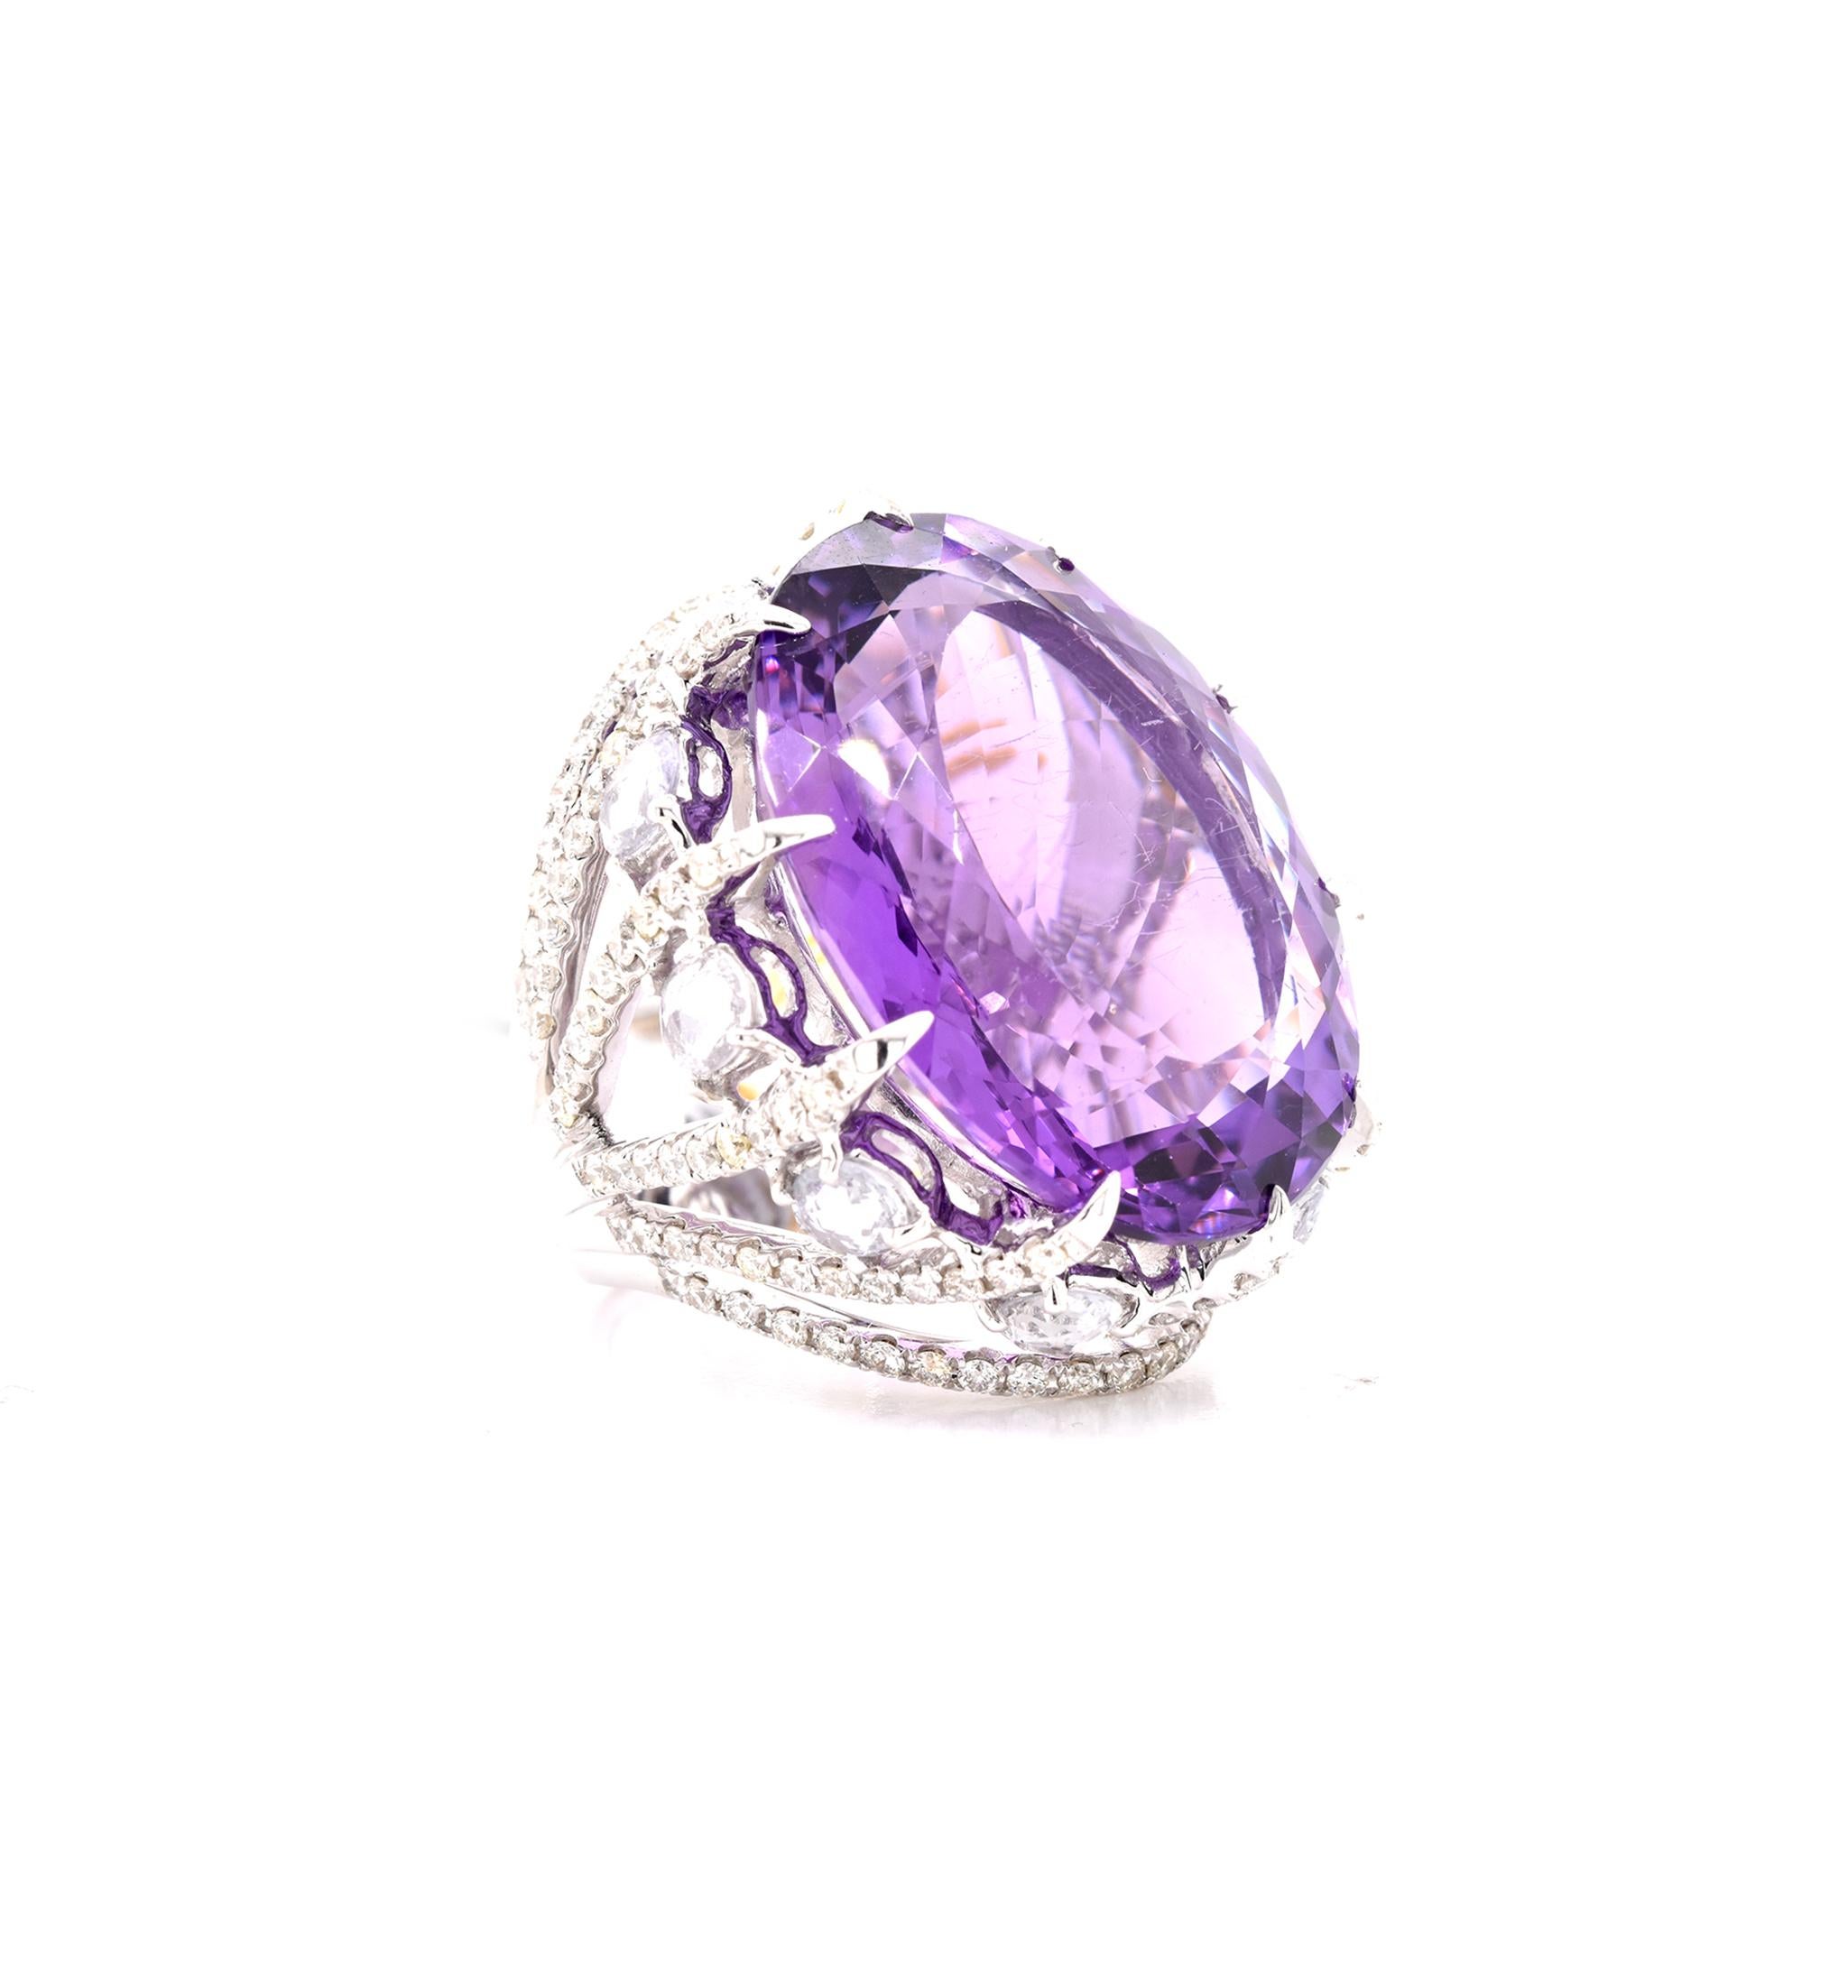 Designer: custom
Material: 18K white gold
Amethyst: 1 oval cut = 39.71ct
White Sapphire: 10 oval cut = 2.66cttw
Diamond: 138 round cut = 1.70cttw
Color: G
Clarity: VS
Ring Size: 6 (please allow up to additional business days for sizing